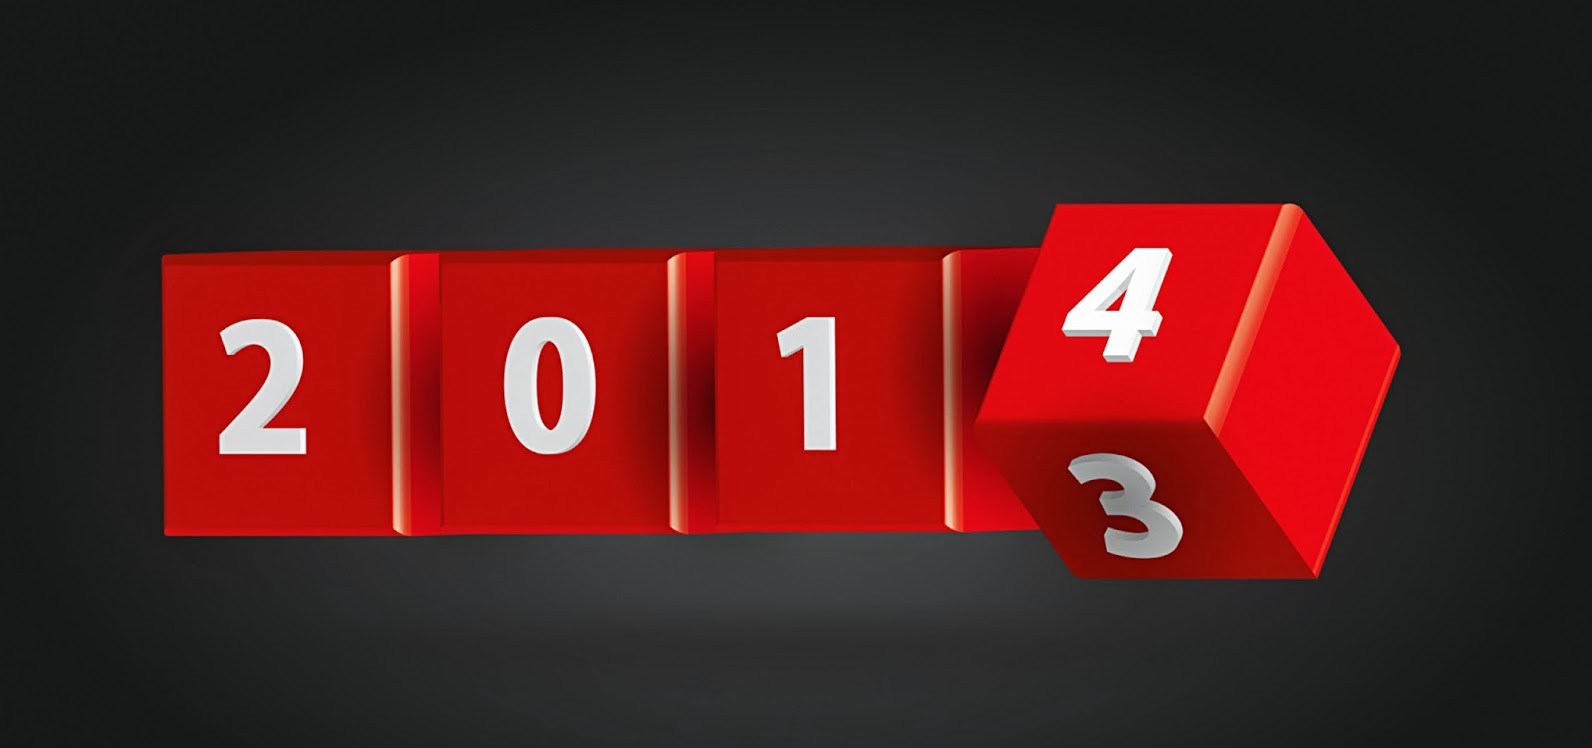 Happy-New-Year-Wishes- 2014-Red-Dice-HD-Wallpapers-With-Greetings-Messages